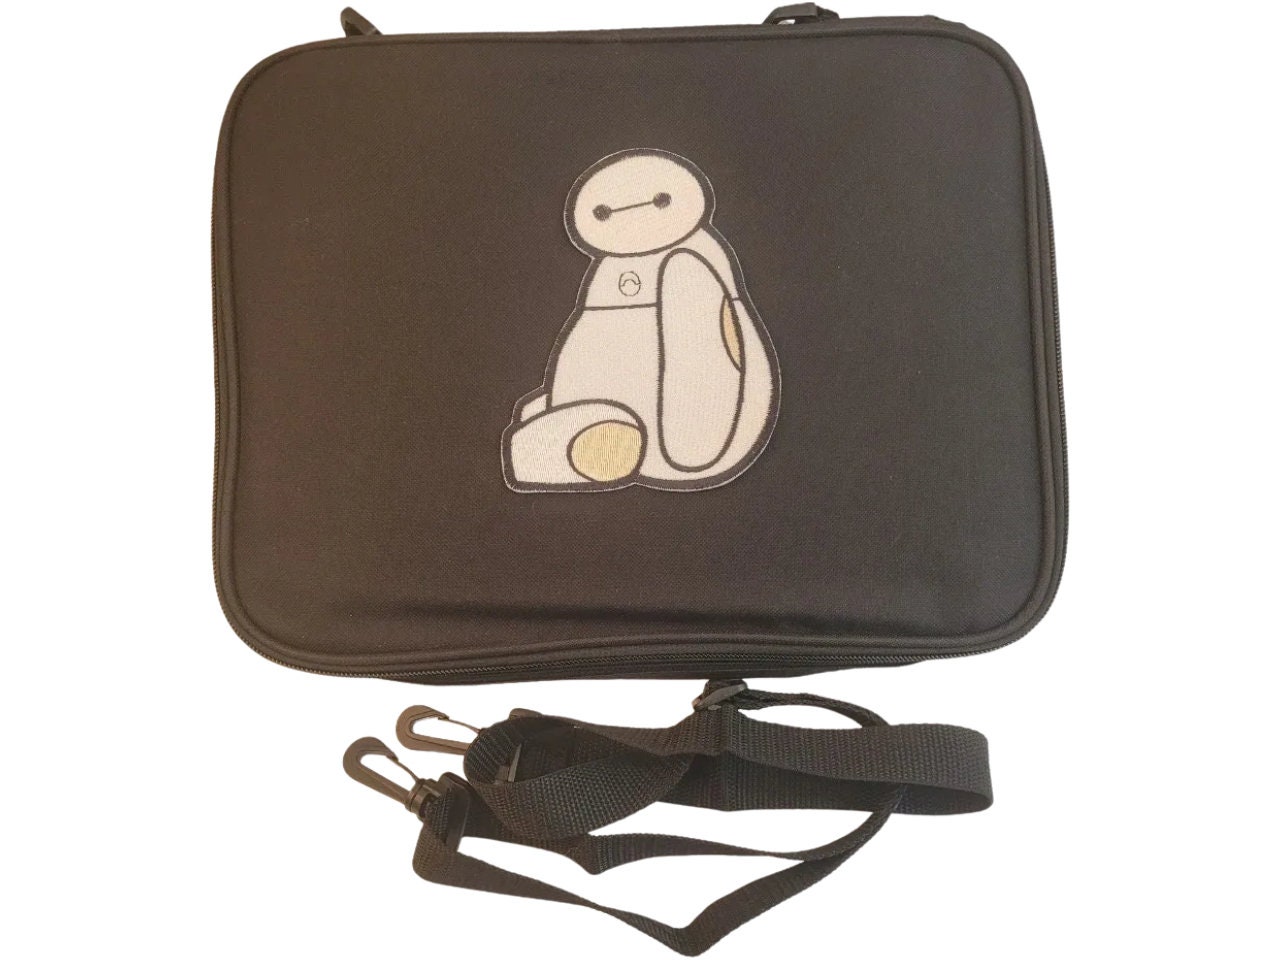 Big Hero Six | Talking Baymax Glow in the Dark Cosplay 10” Faux Leather  Mini Backpack by Loungefly | Popcultcha